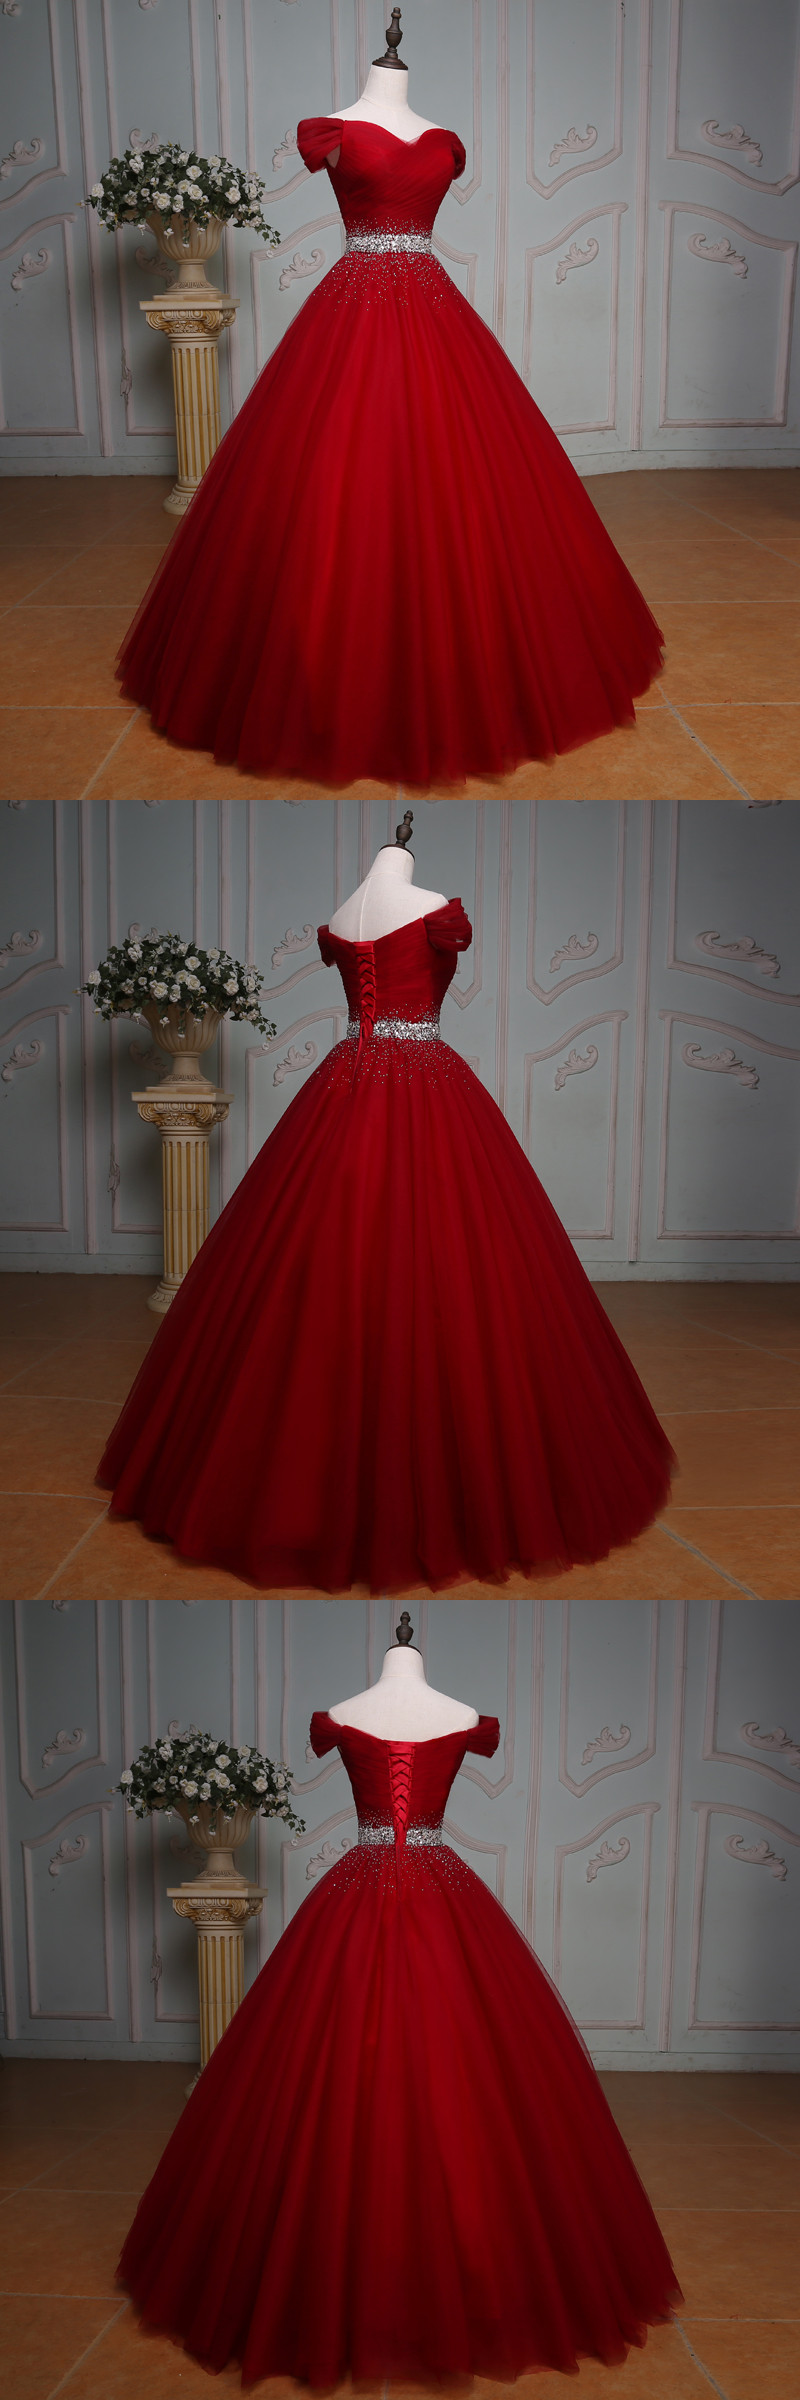 Red Ball Gown Sweetheart Cap Sleeves Tulle Elegant Evening Dress